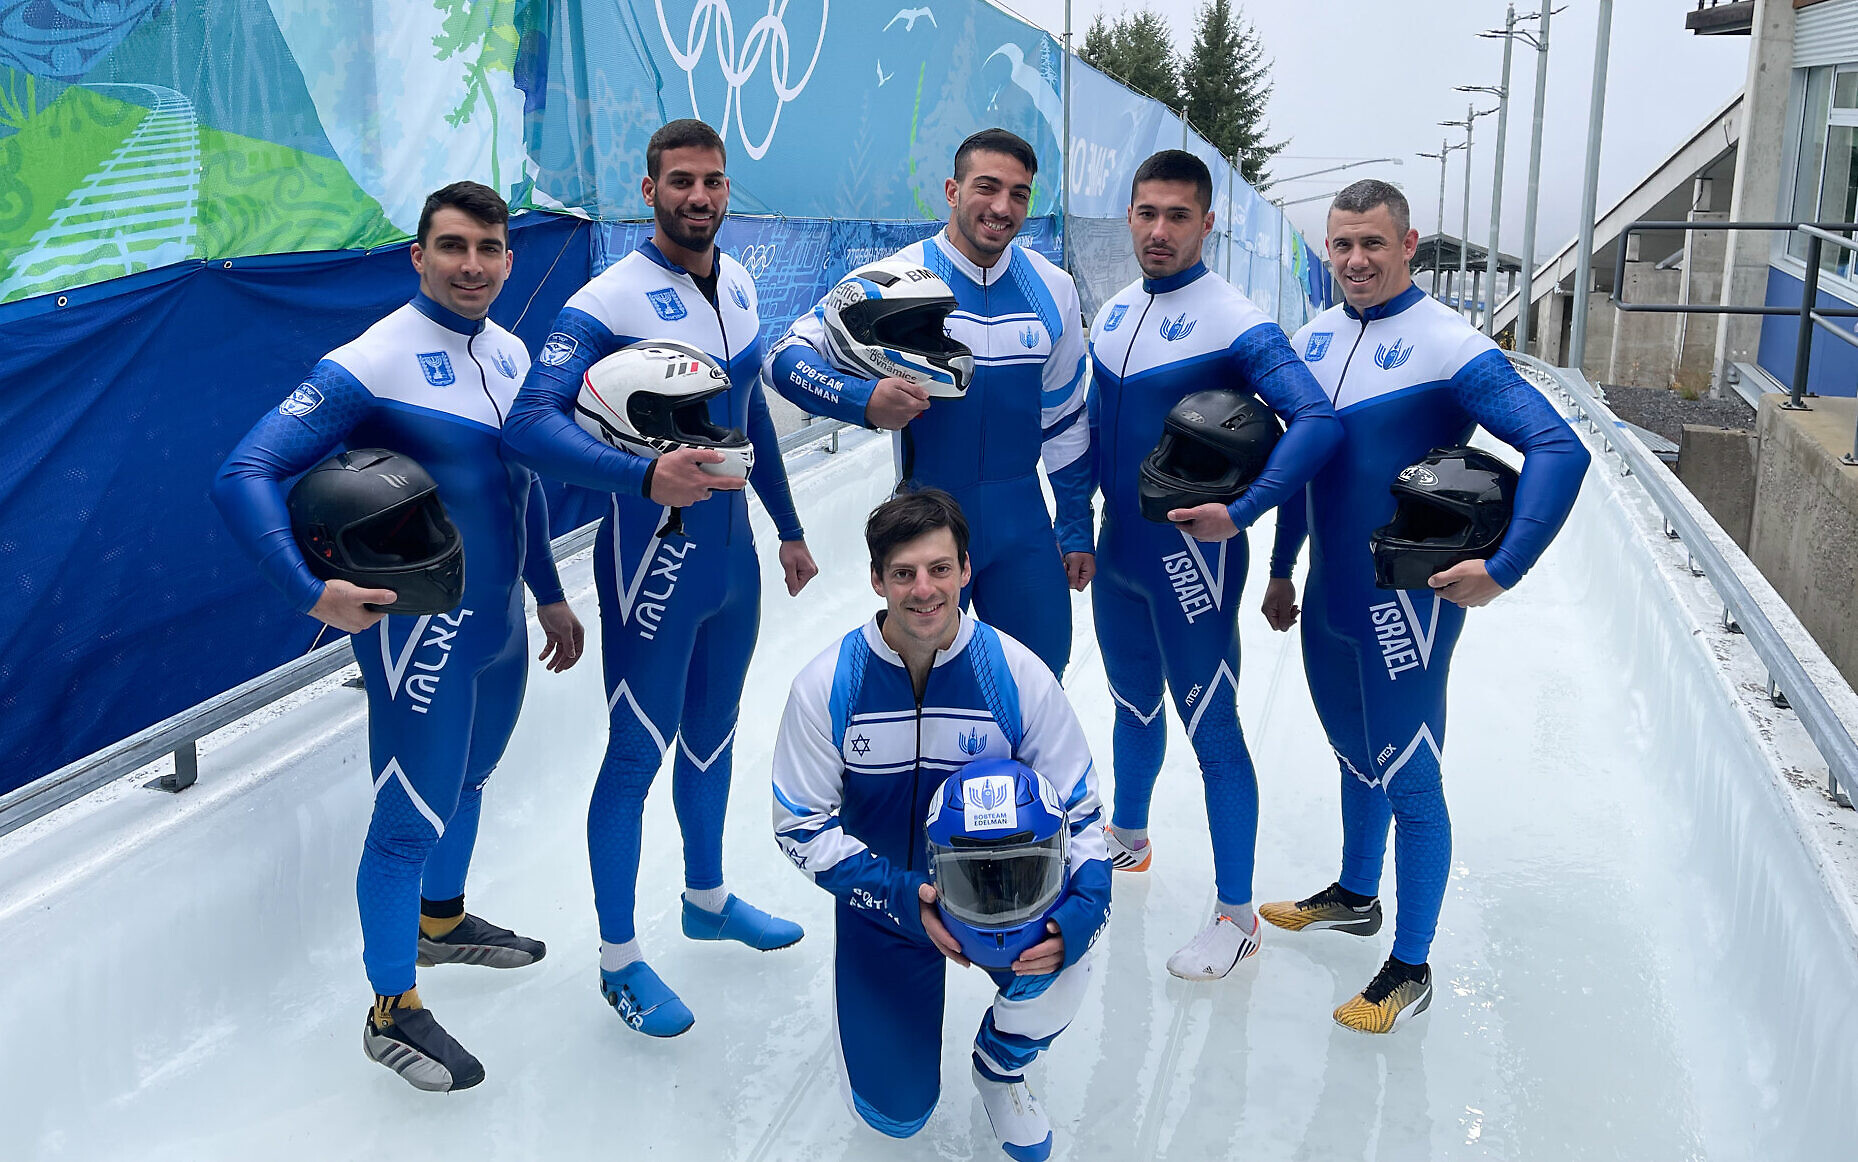 AJ Edelman (front) poses for a photo with the rest of the Israel Bobsled team (from left): Amitay Tzemach, Ward Fawarsy, Menachem Chen, Roman Shargaev and Amit Haas. (Courtesy AJ Edelman)